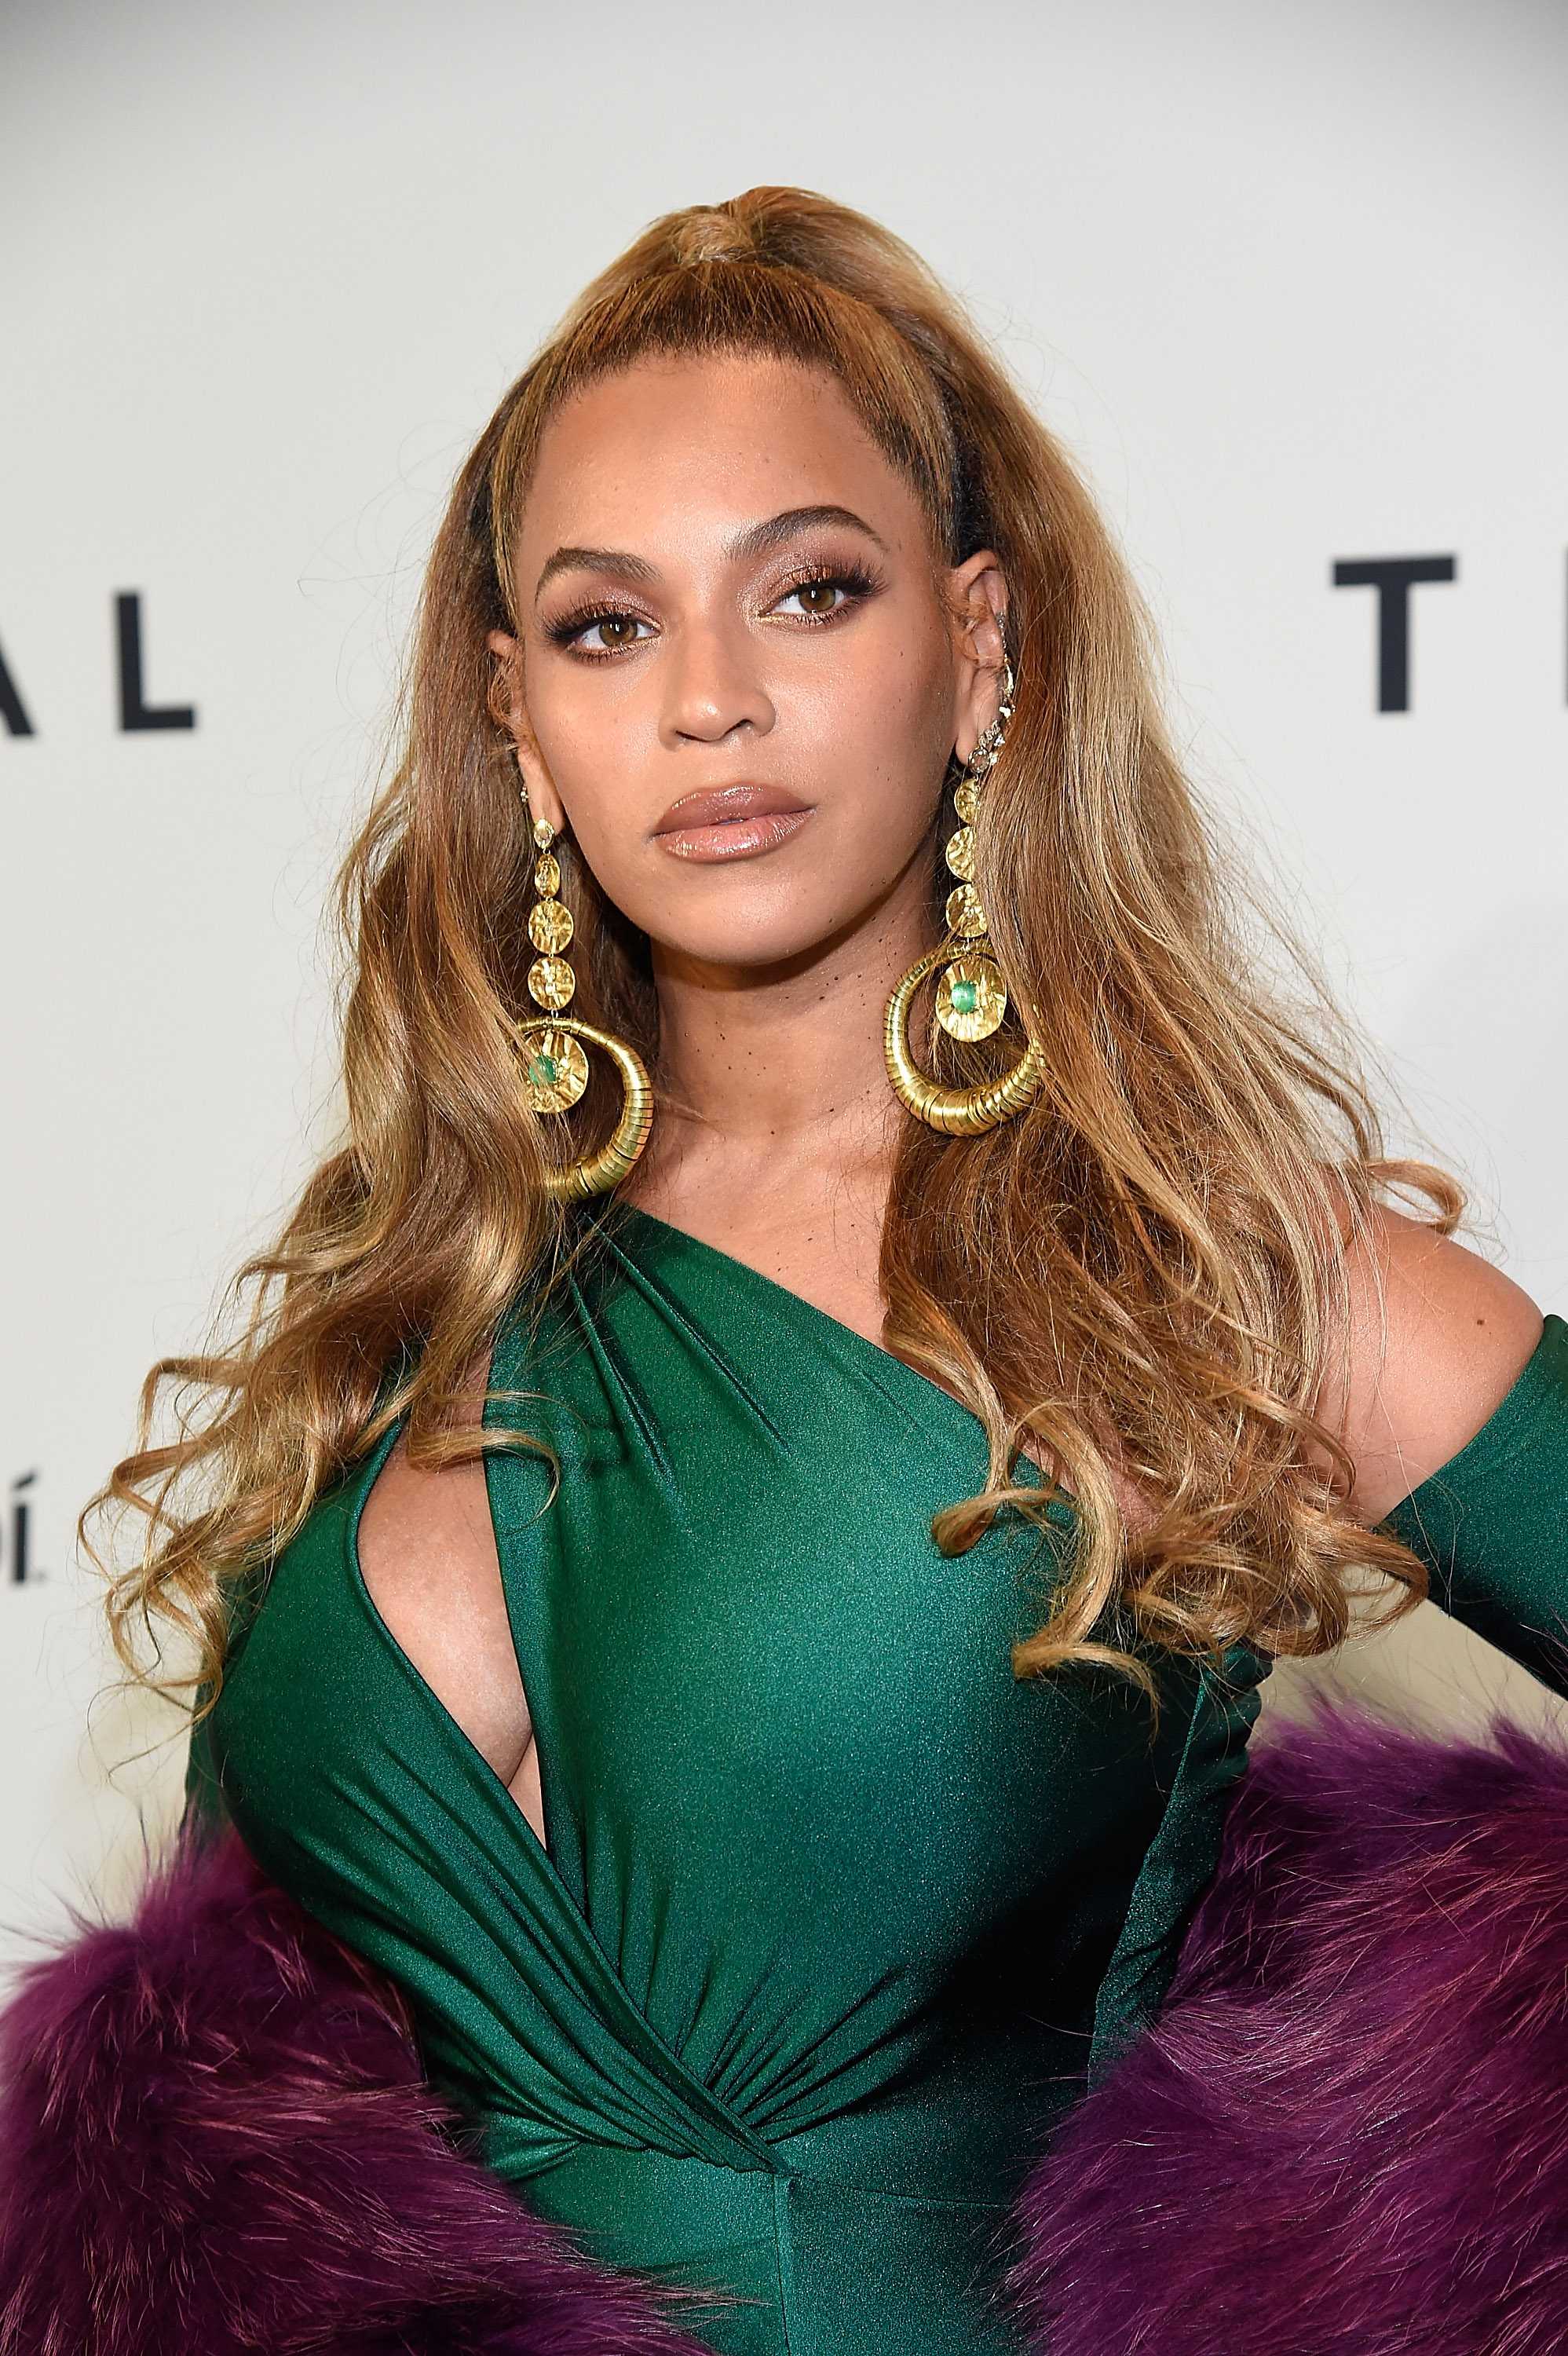 Beyoncé is officially the richest woman in music